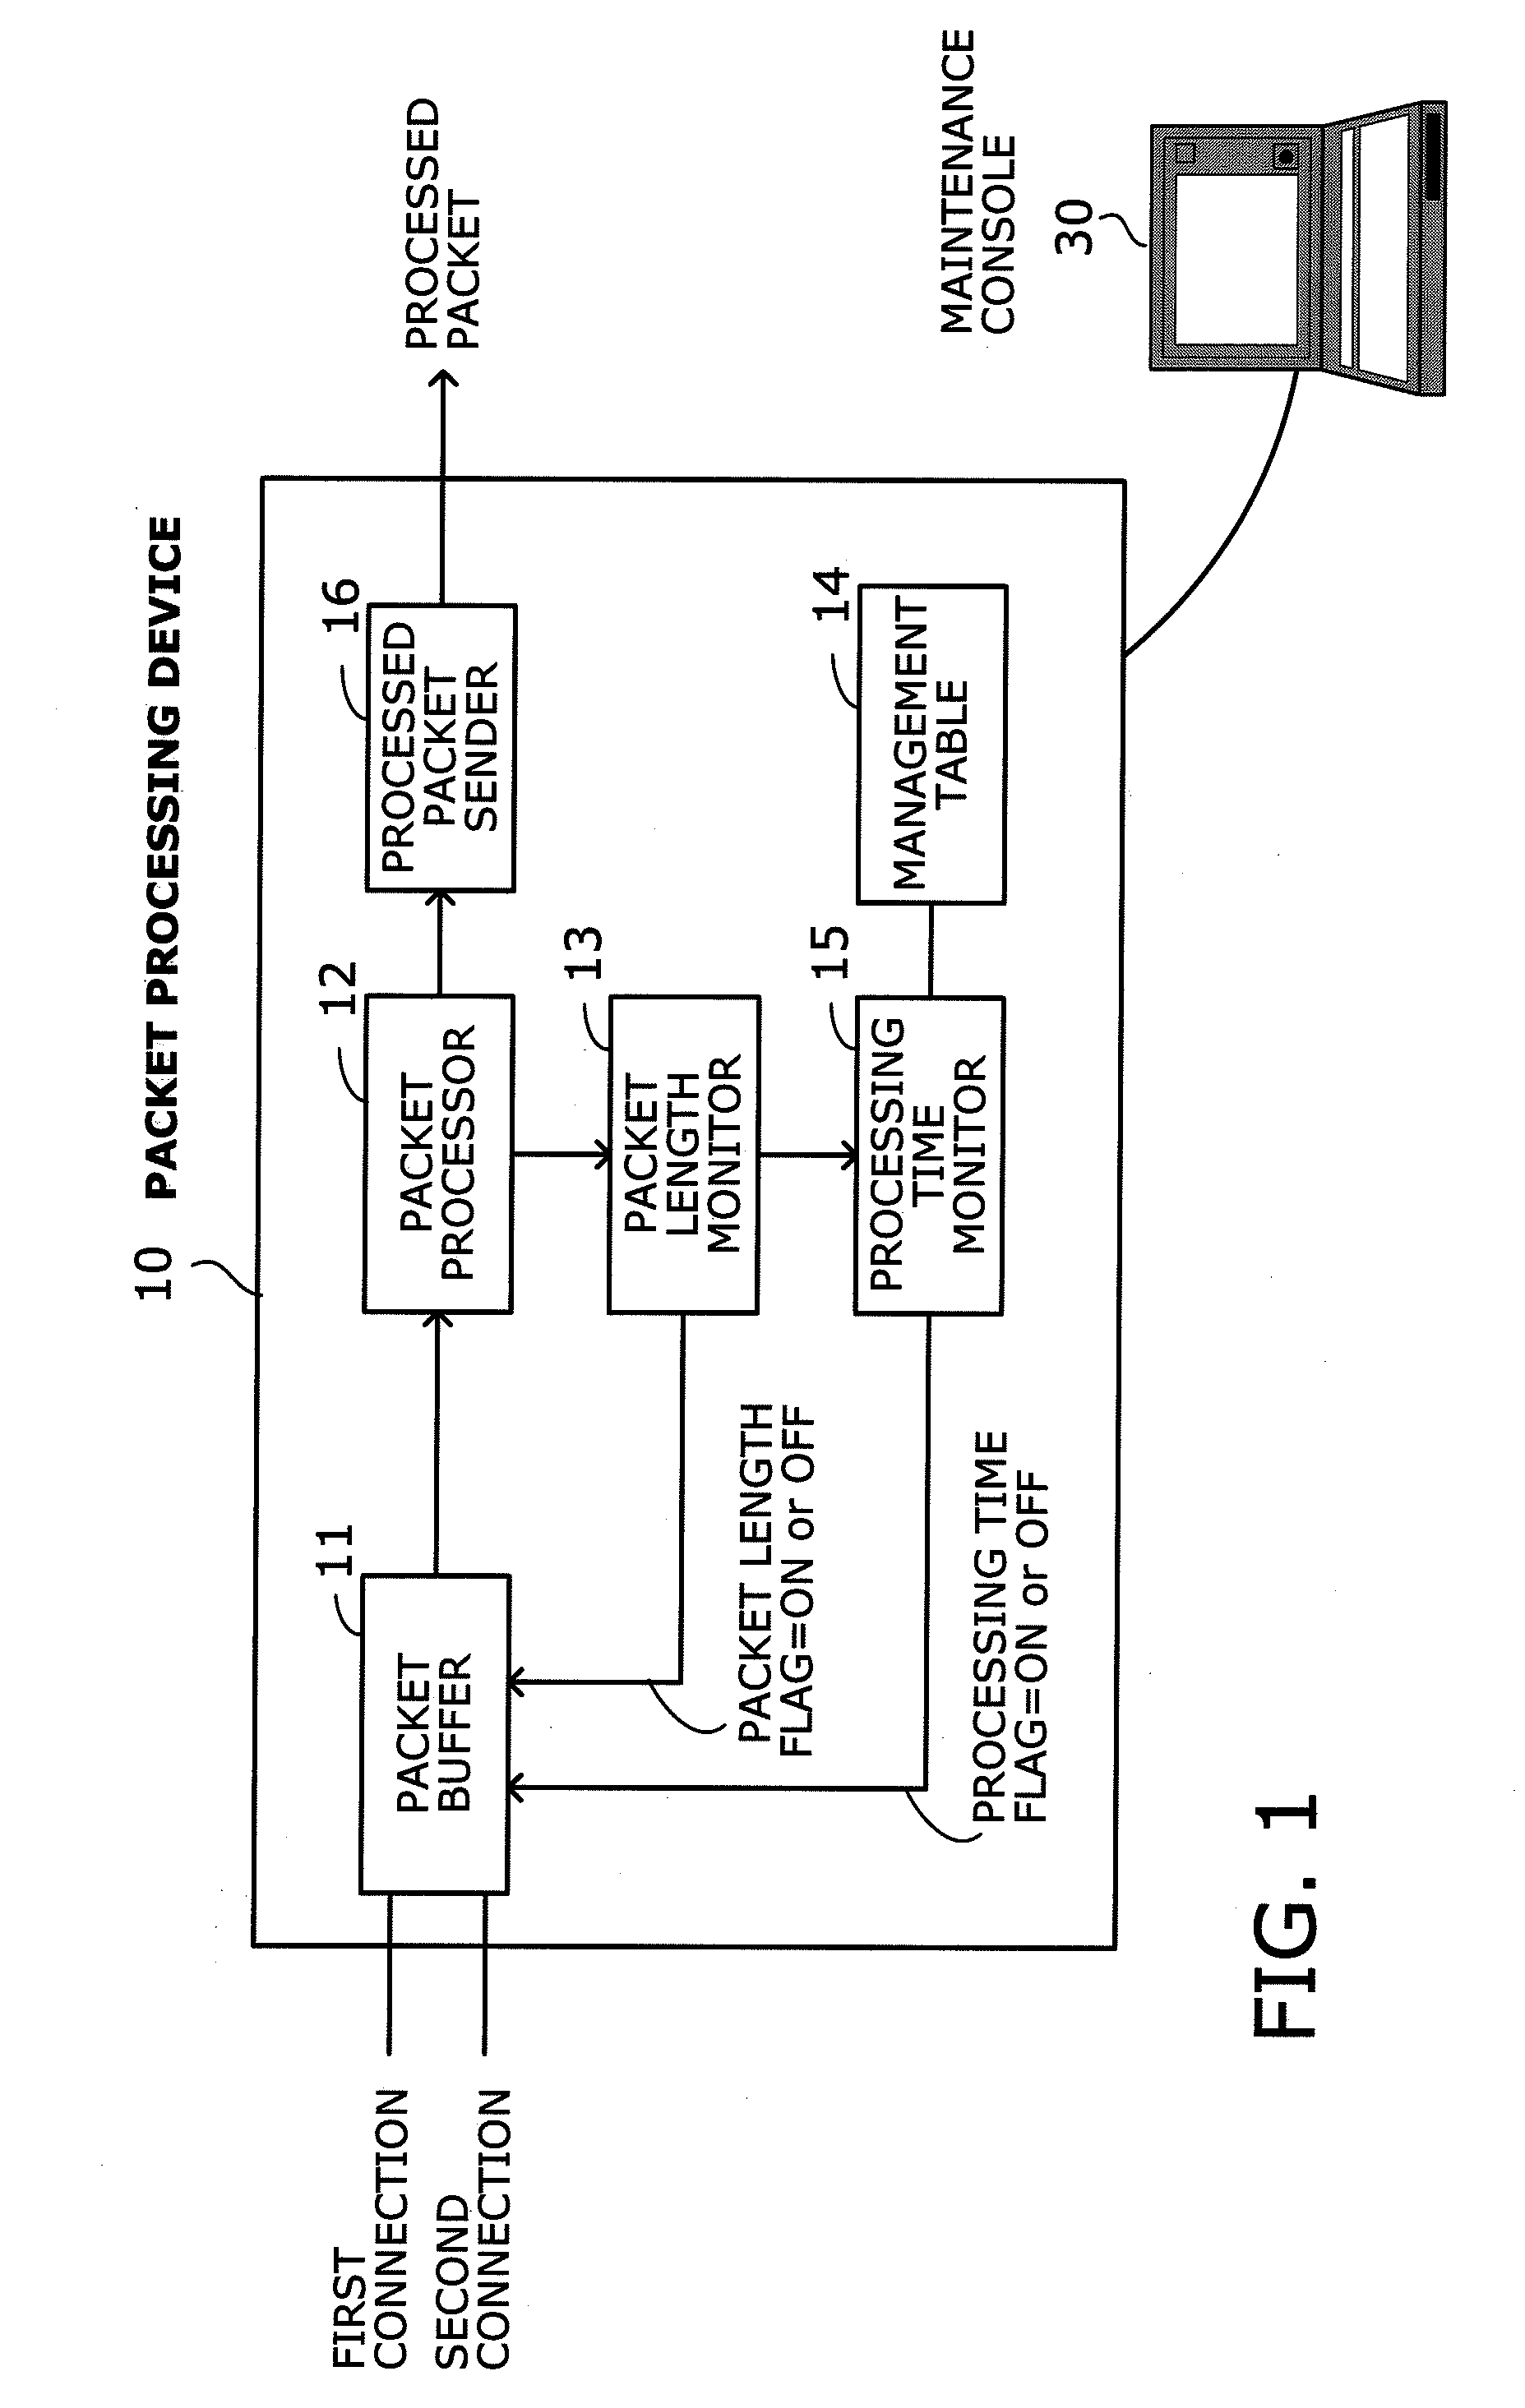 Packet processing device with load control mechanism based on packet length and CPU time consumption